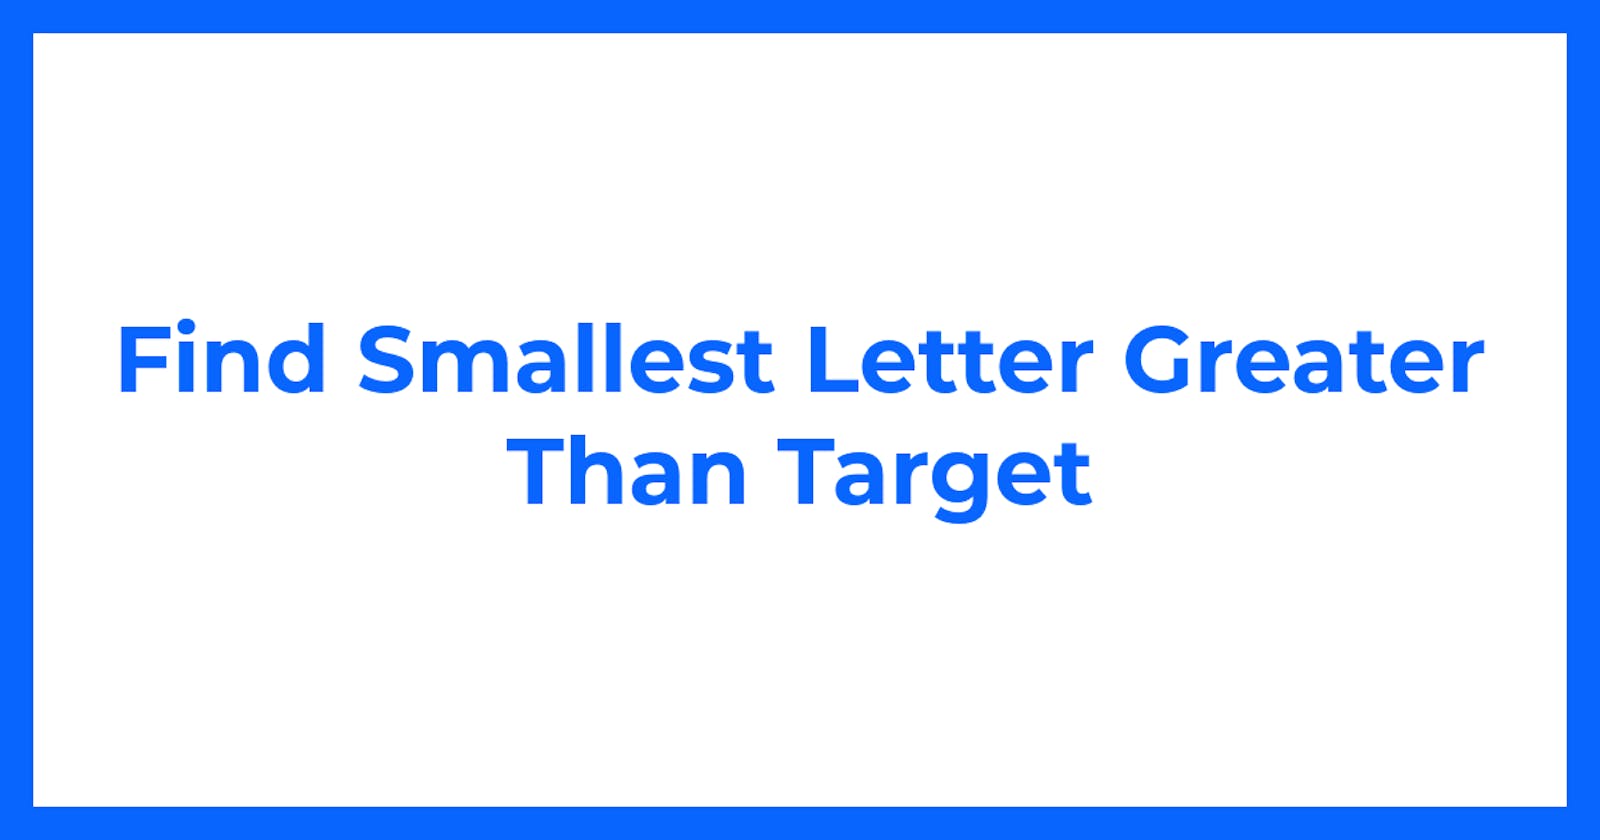 Find Smallest Letter Greater Than Target